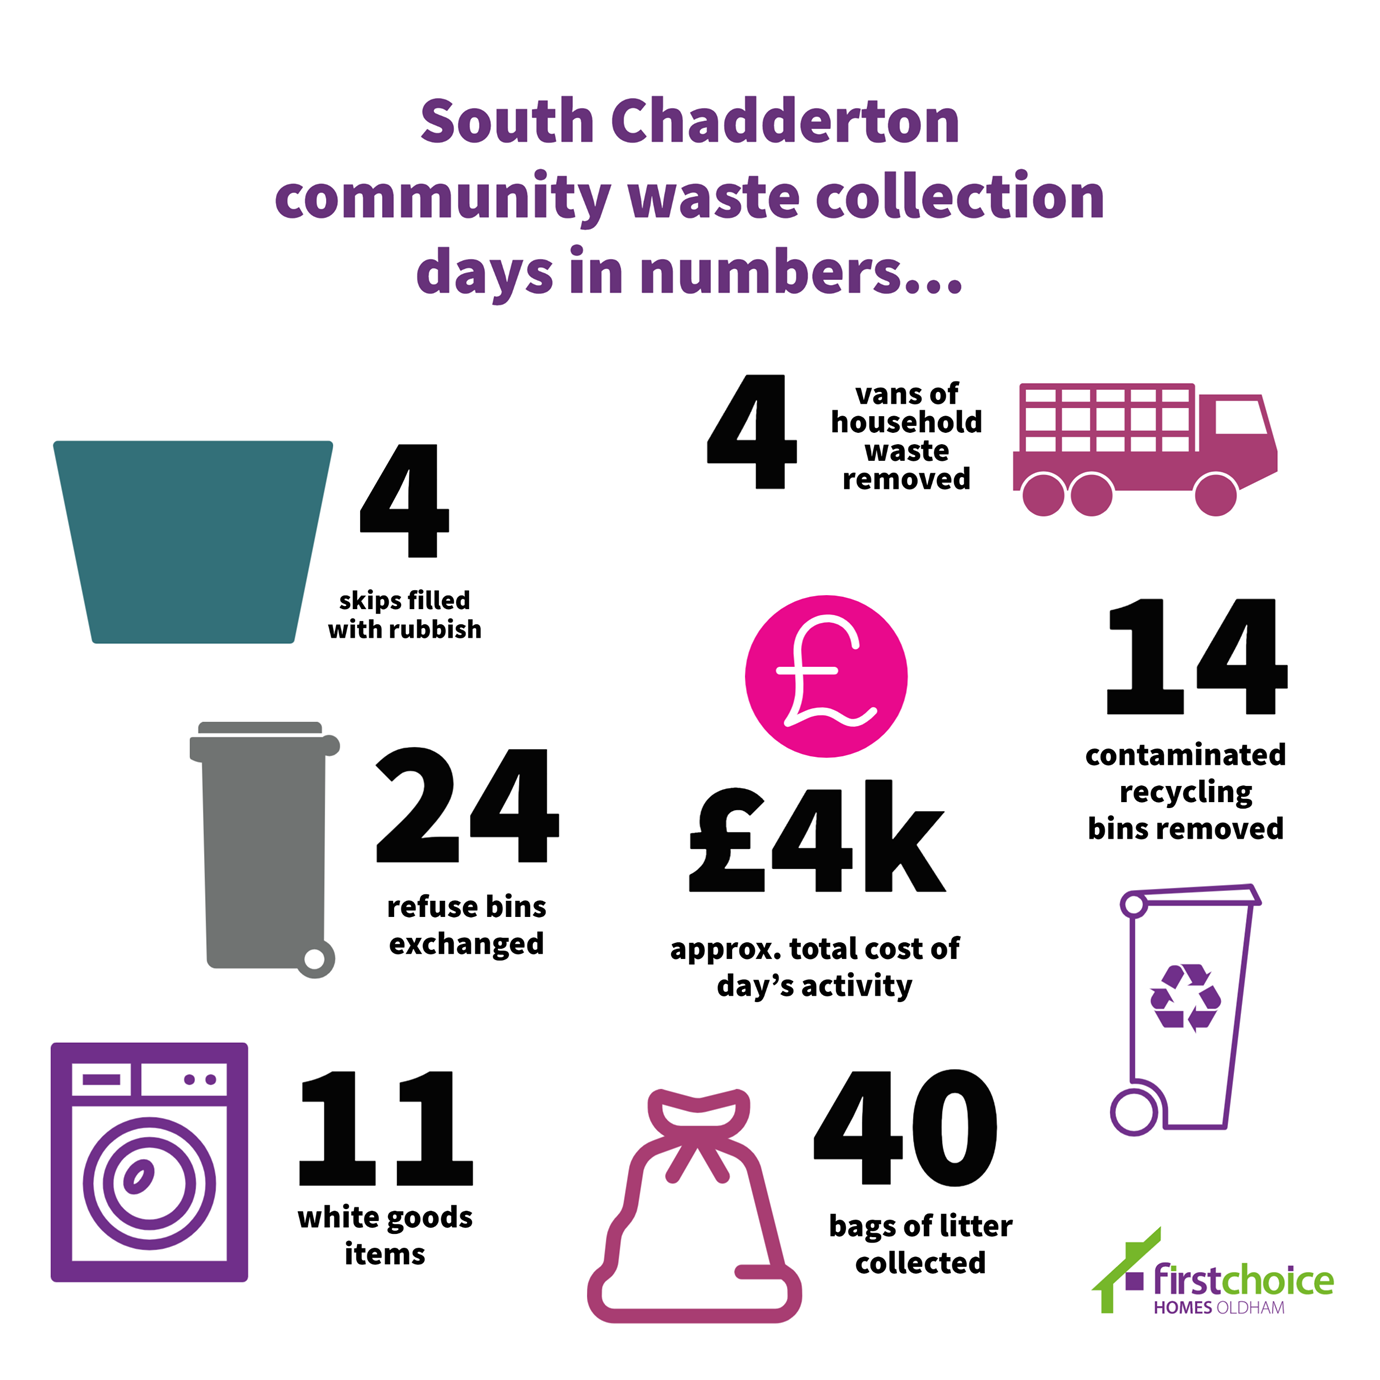 South Chadderton Community Waste Collection Day 1